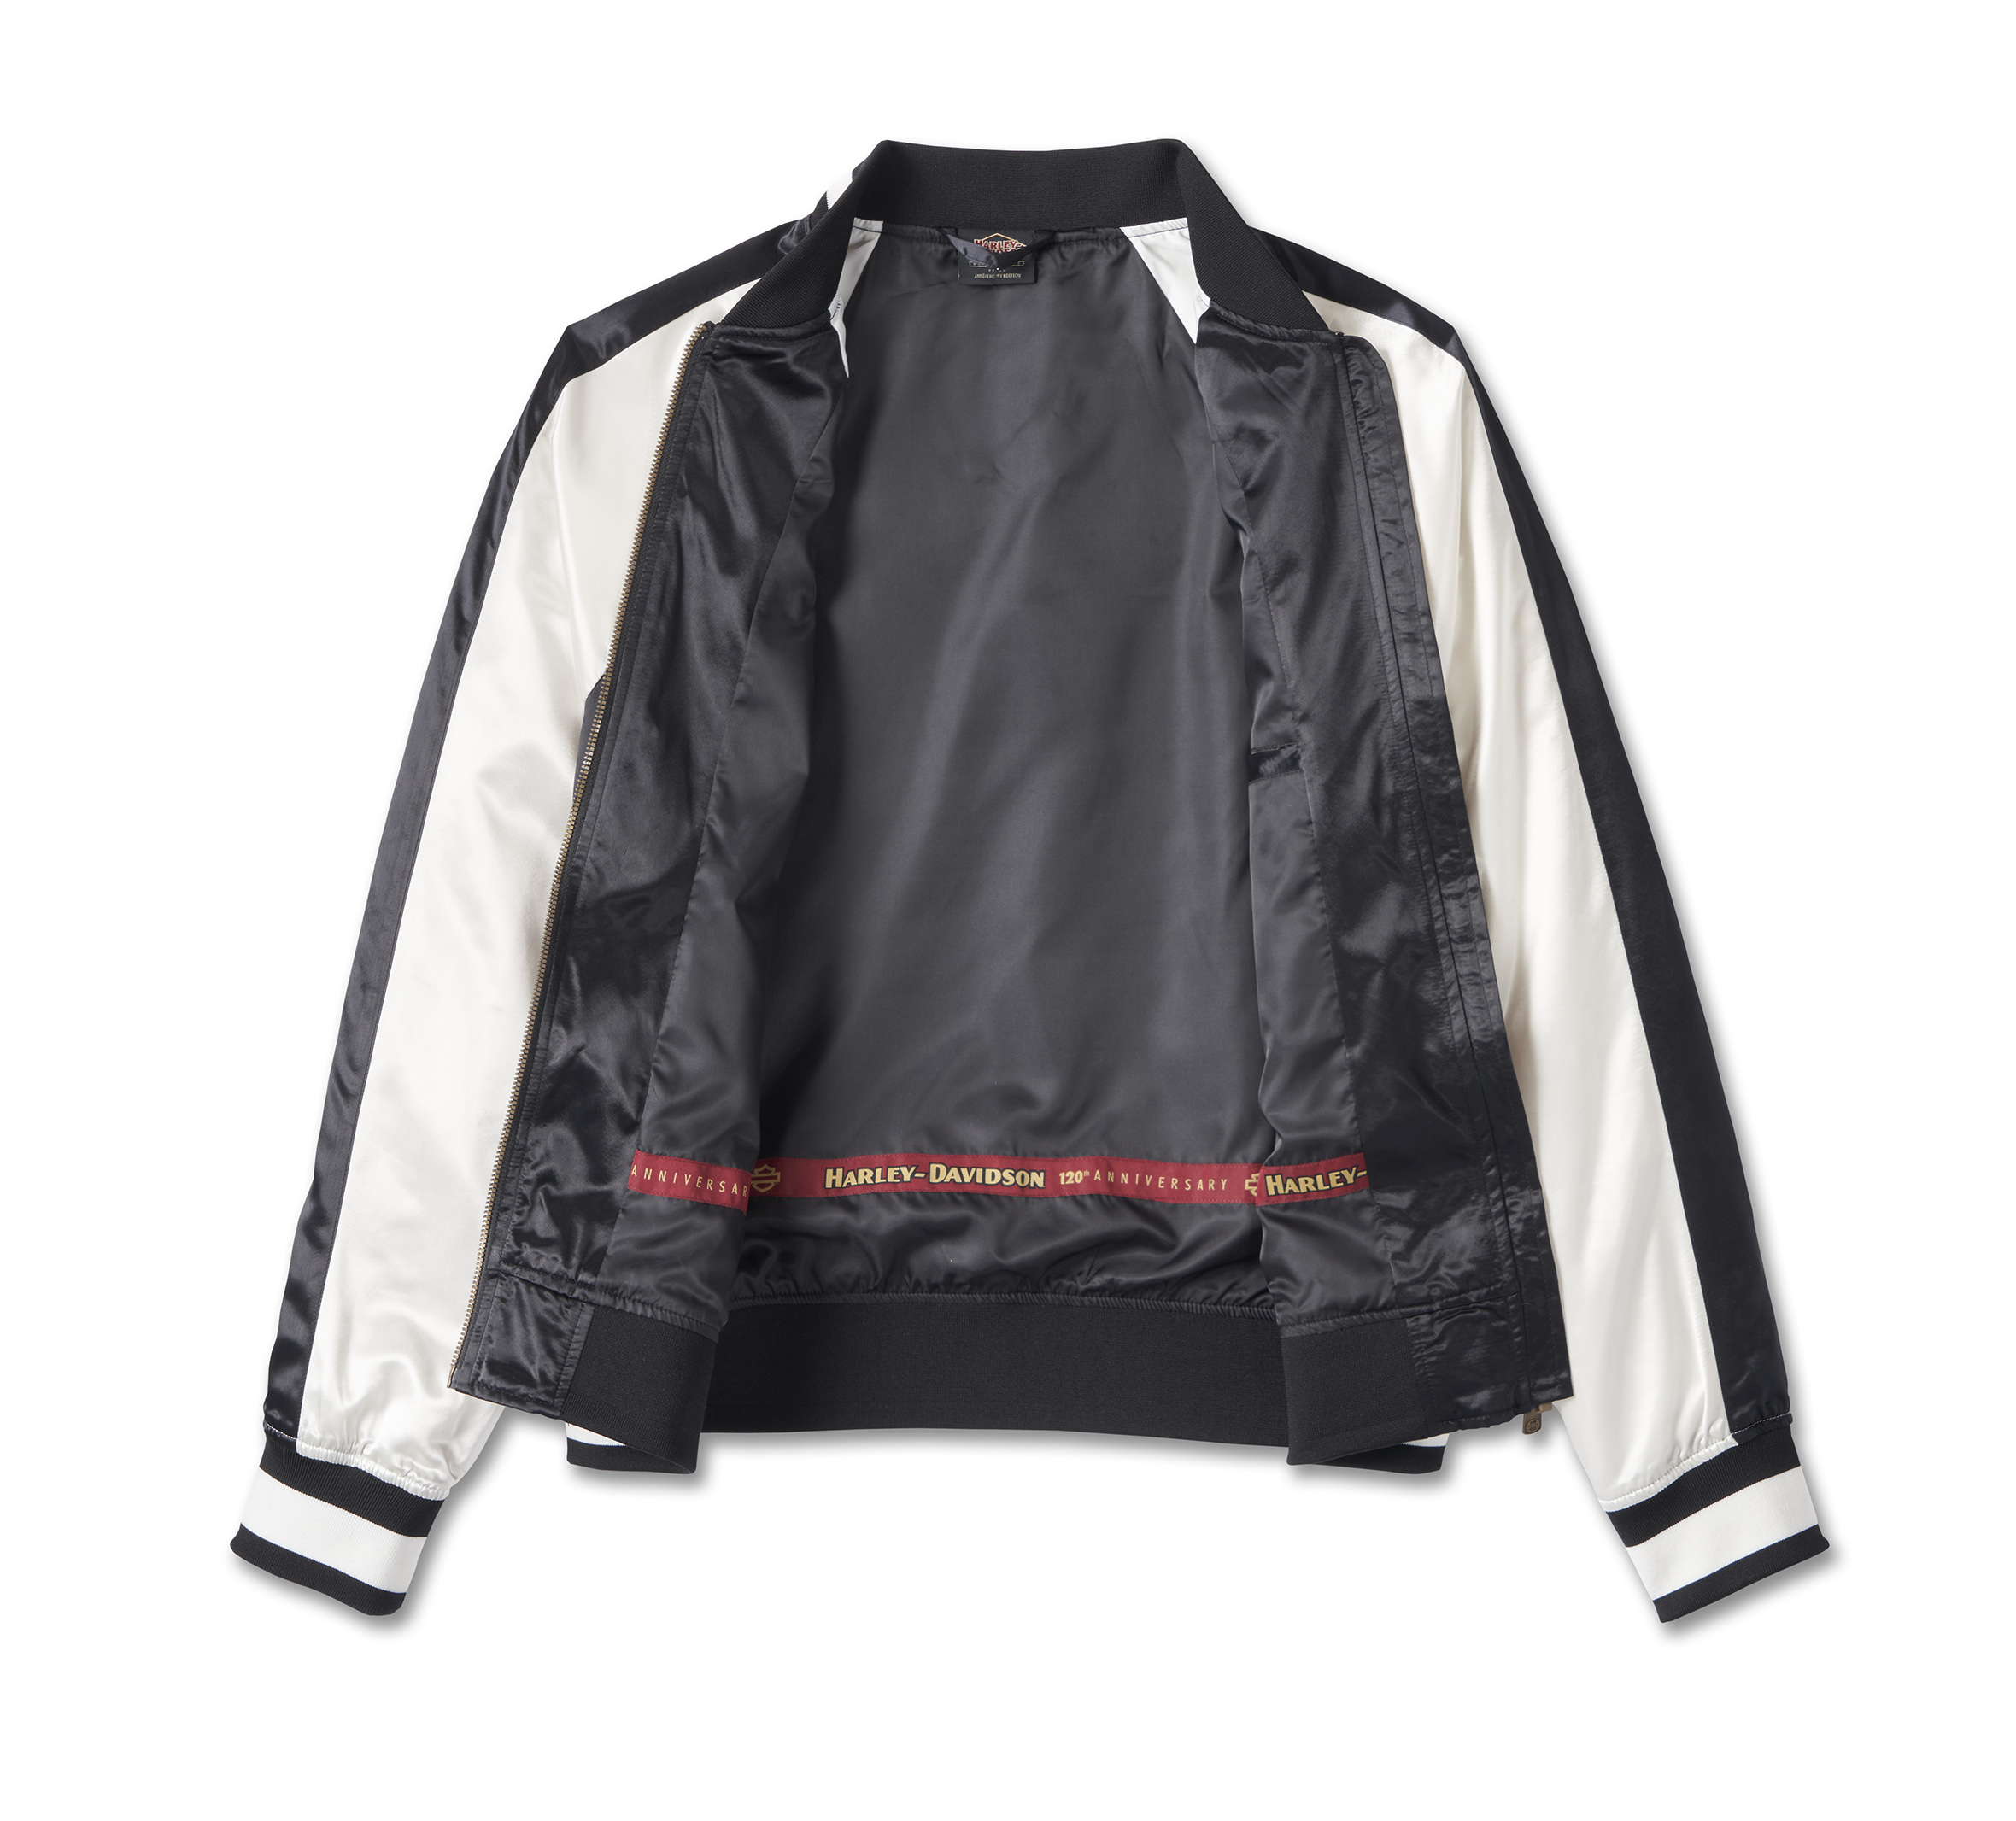 Women's 120th Anniversary Classic Bomber Jacket - Colorblocked